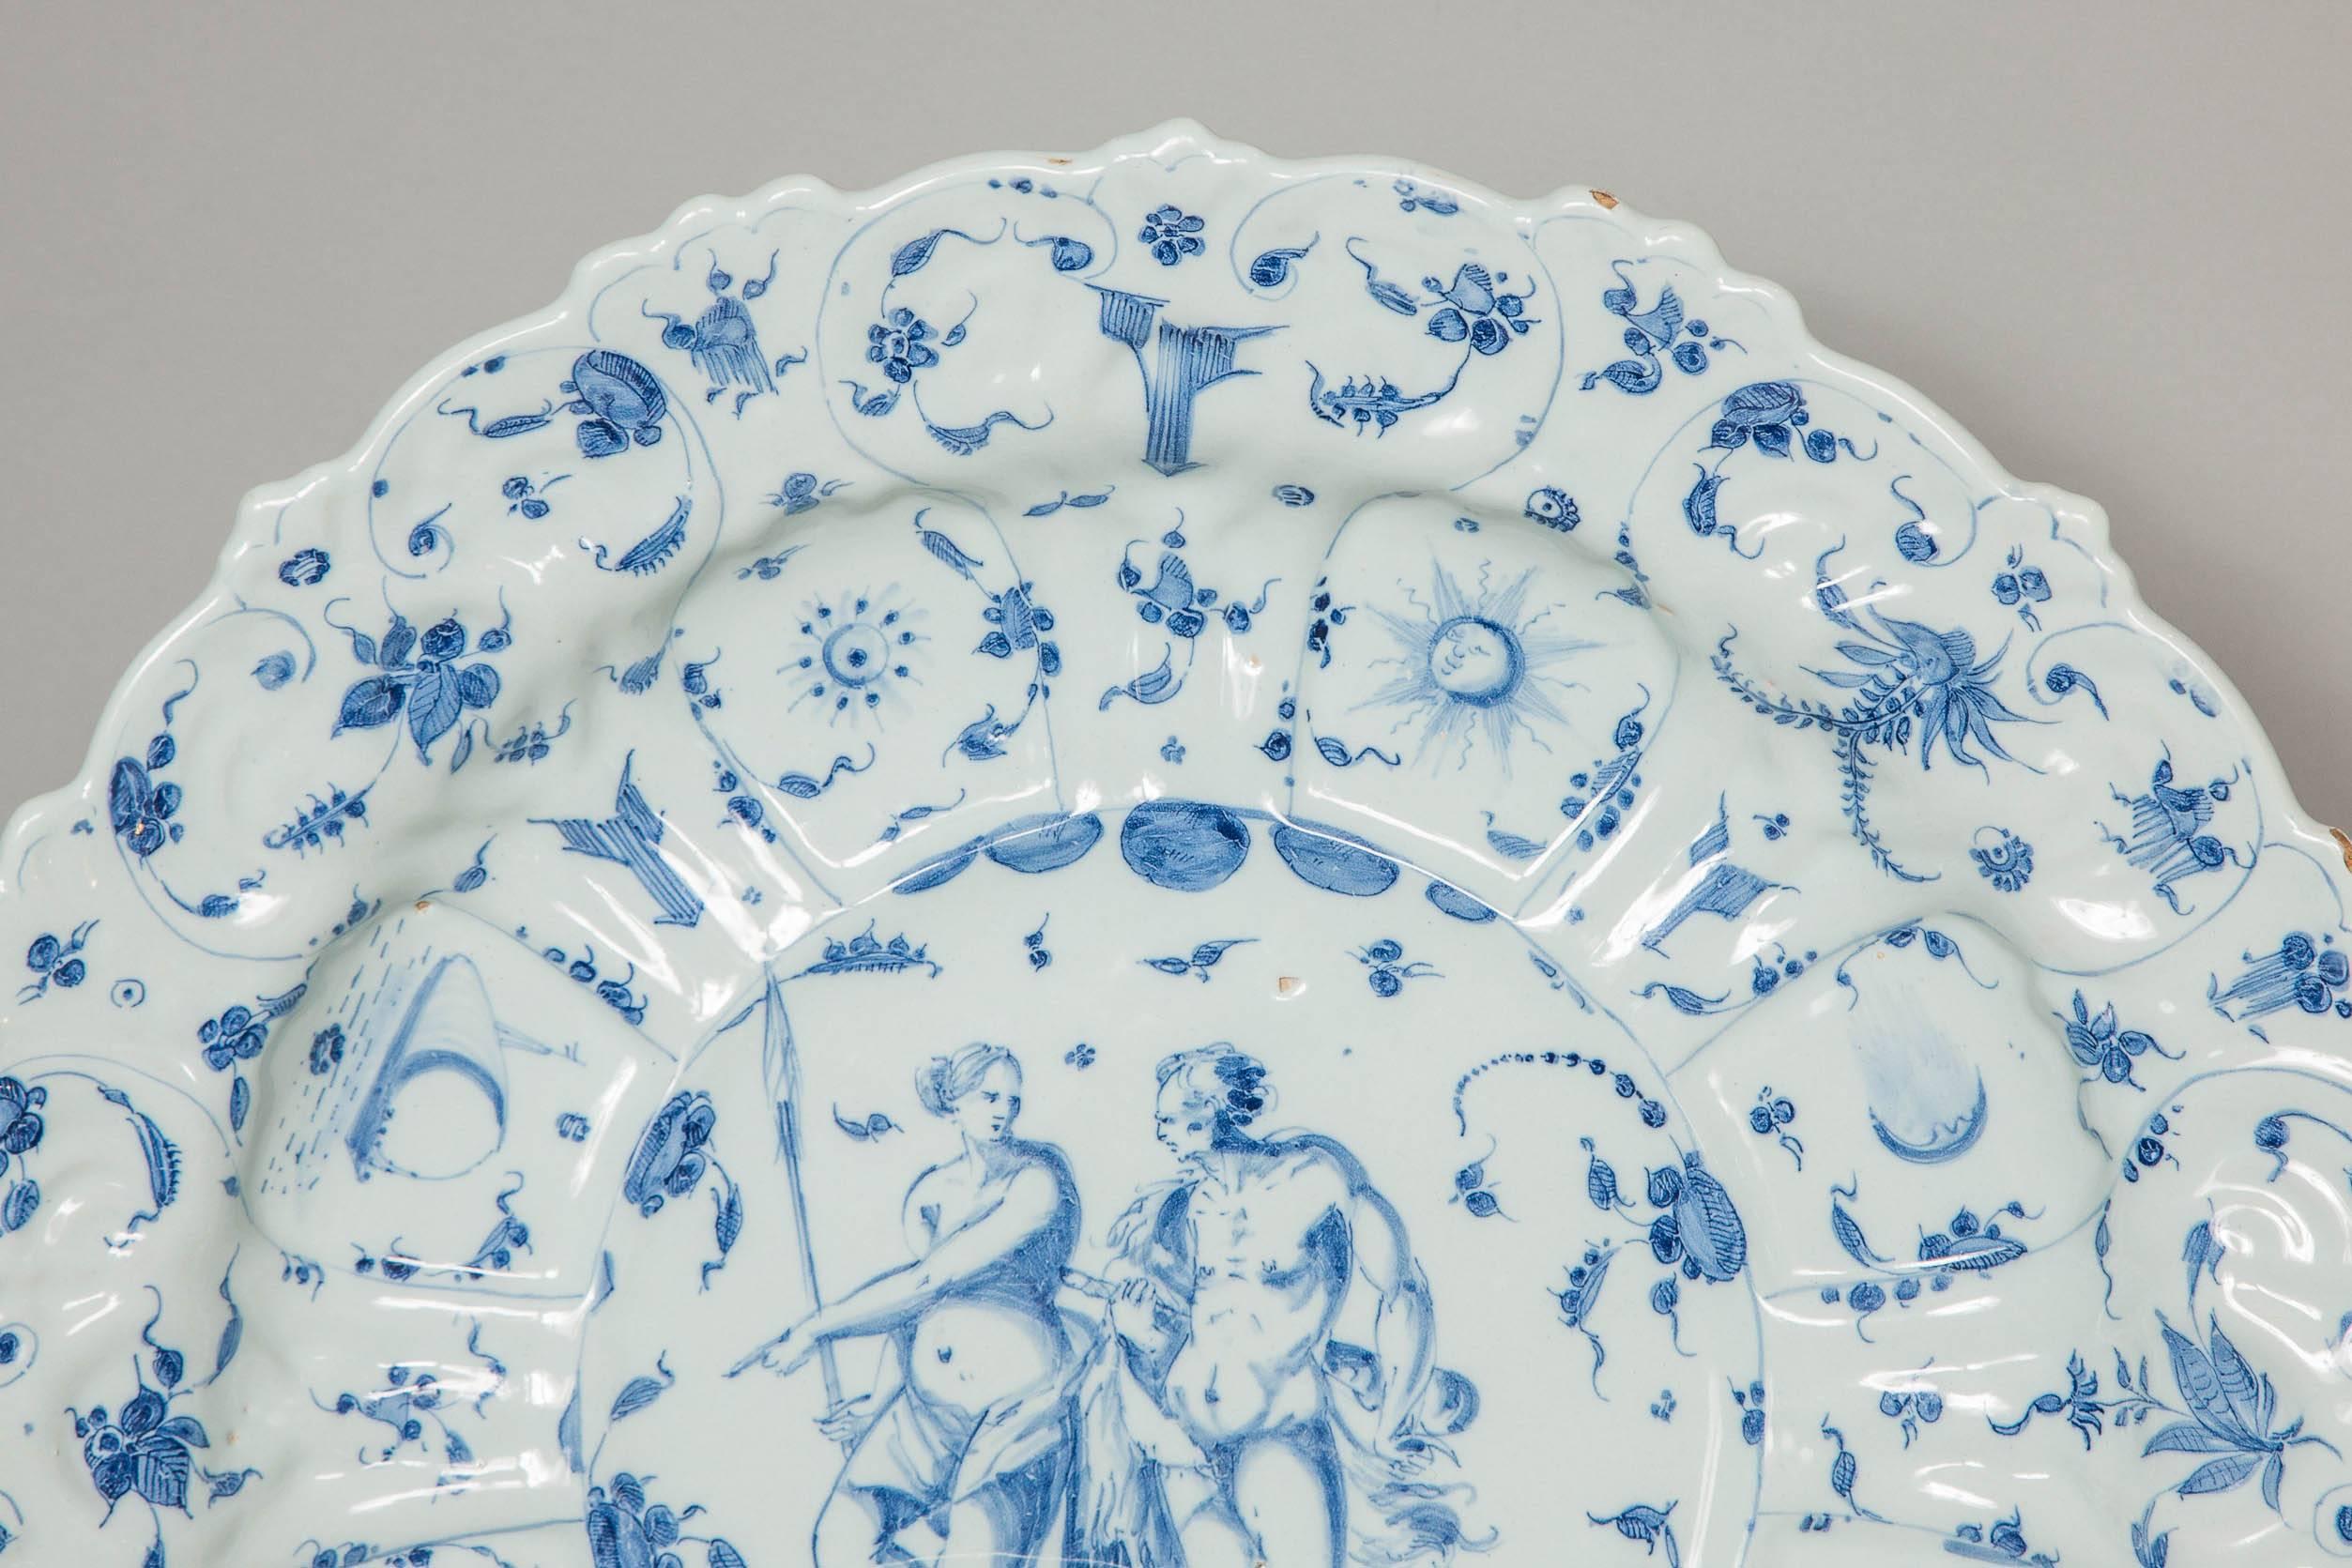 A large and rare Italian Savona blue and white charger dating 1670.
The large shaped plated decorated with so-called "tappezzeria" pattern (meaning wallpaper" and at the centre depicting "Heracles and Omphale"
Only few